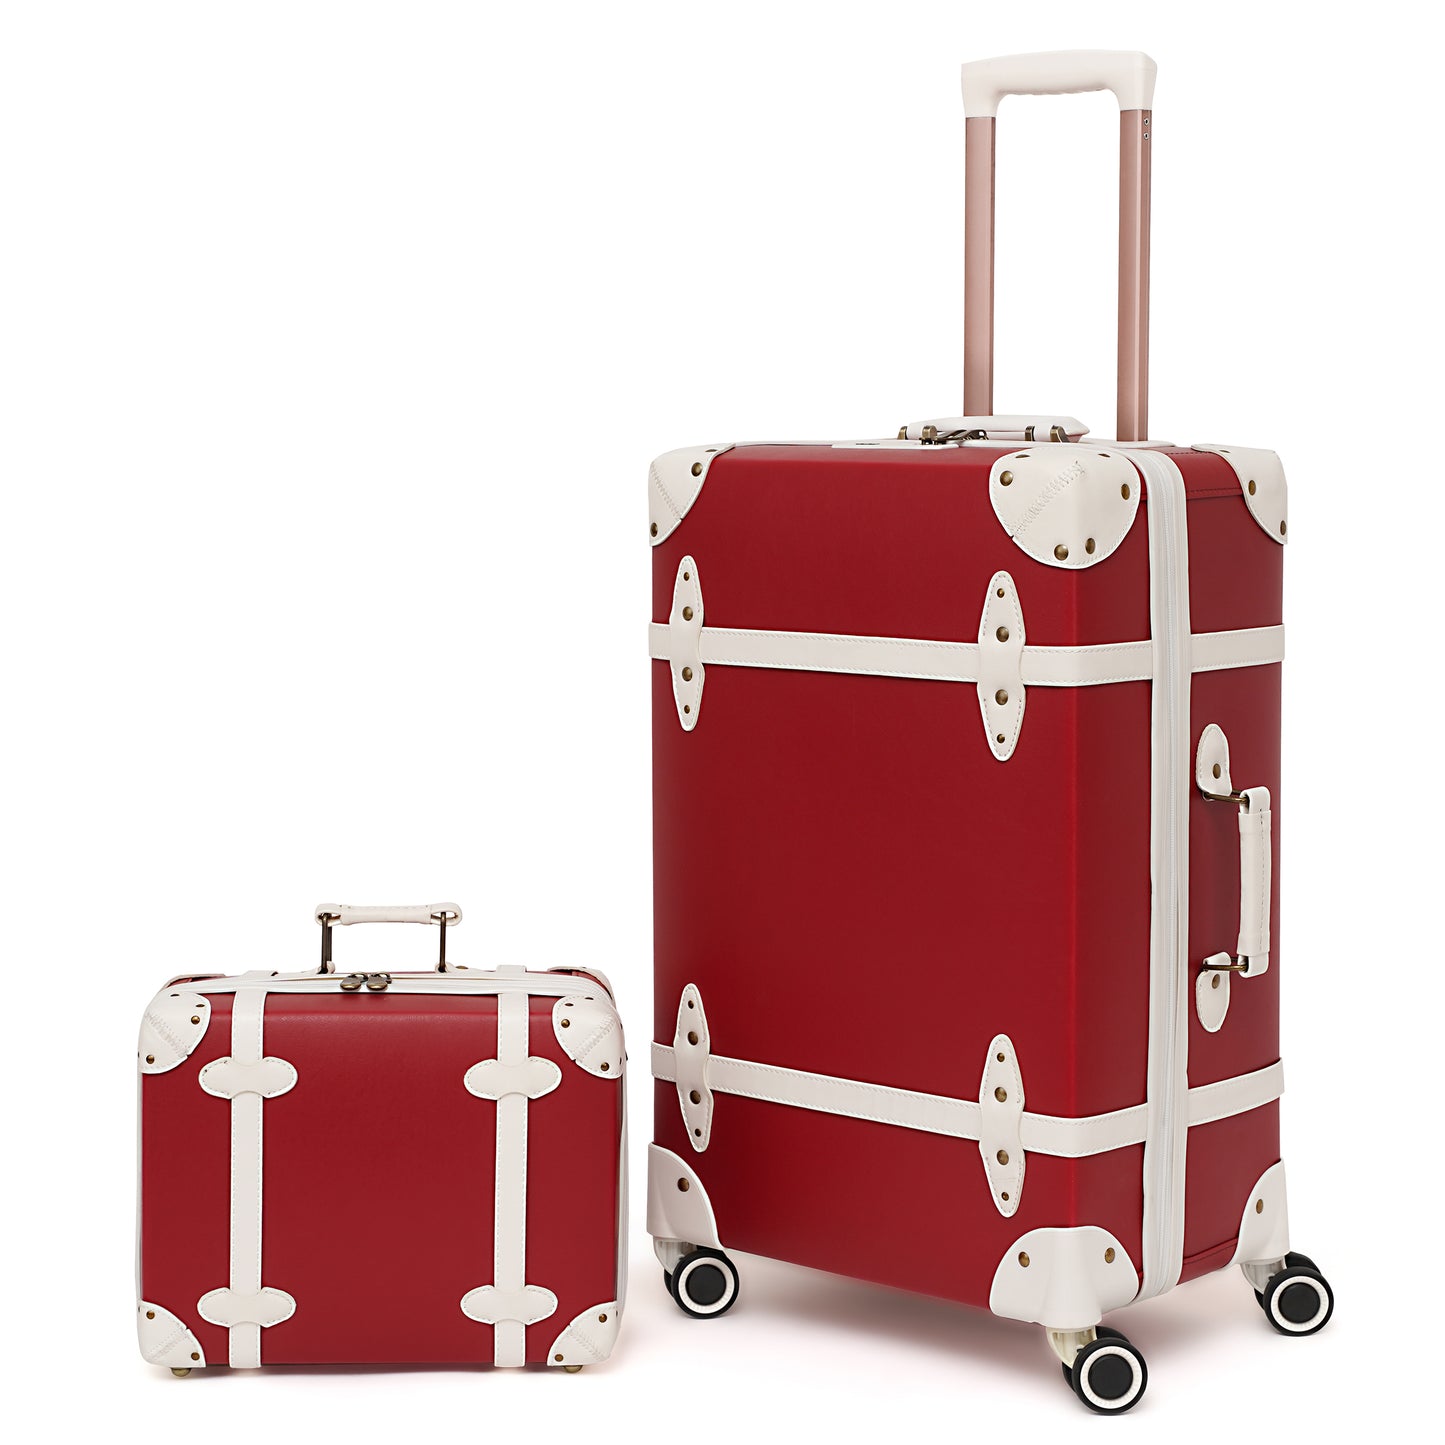 NZBZ Vintage Luggage Set Carry On Cute Suitcase with Rolling Spinner Wheels and Tsa Lock Retro Trunk luggage 2 pieces